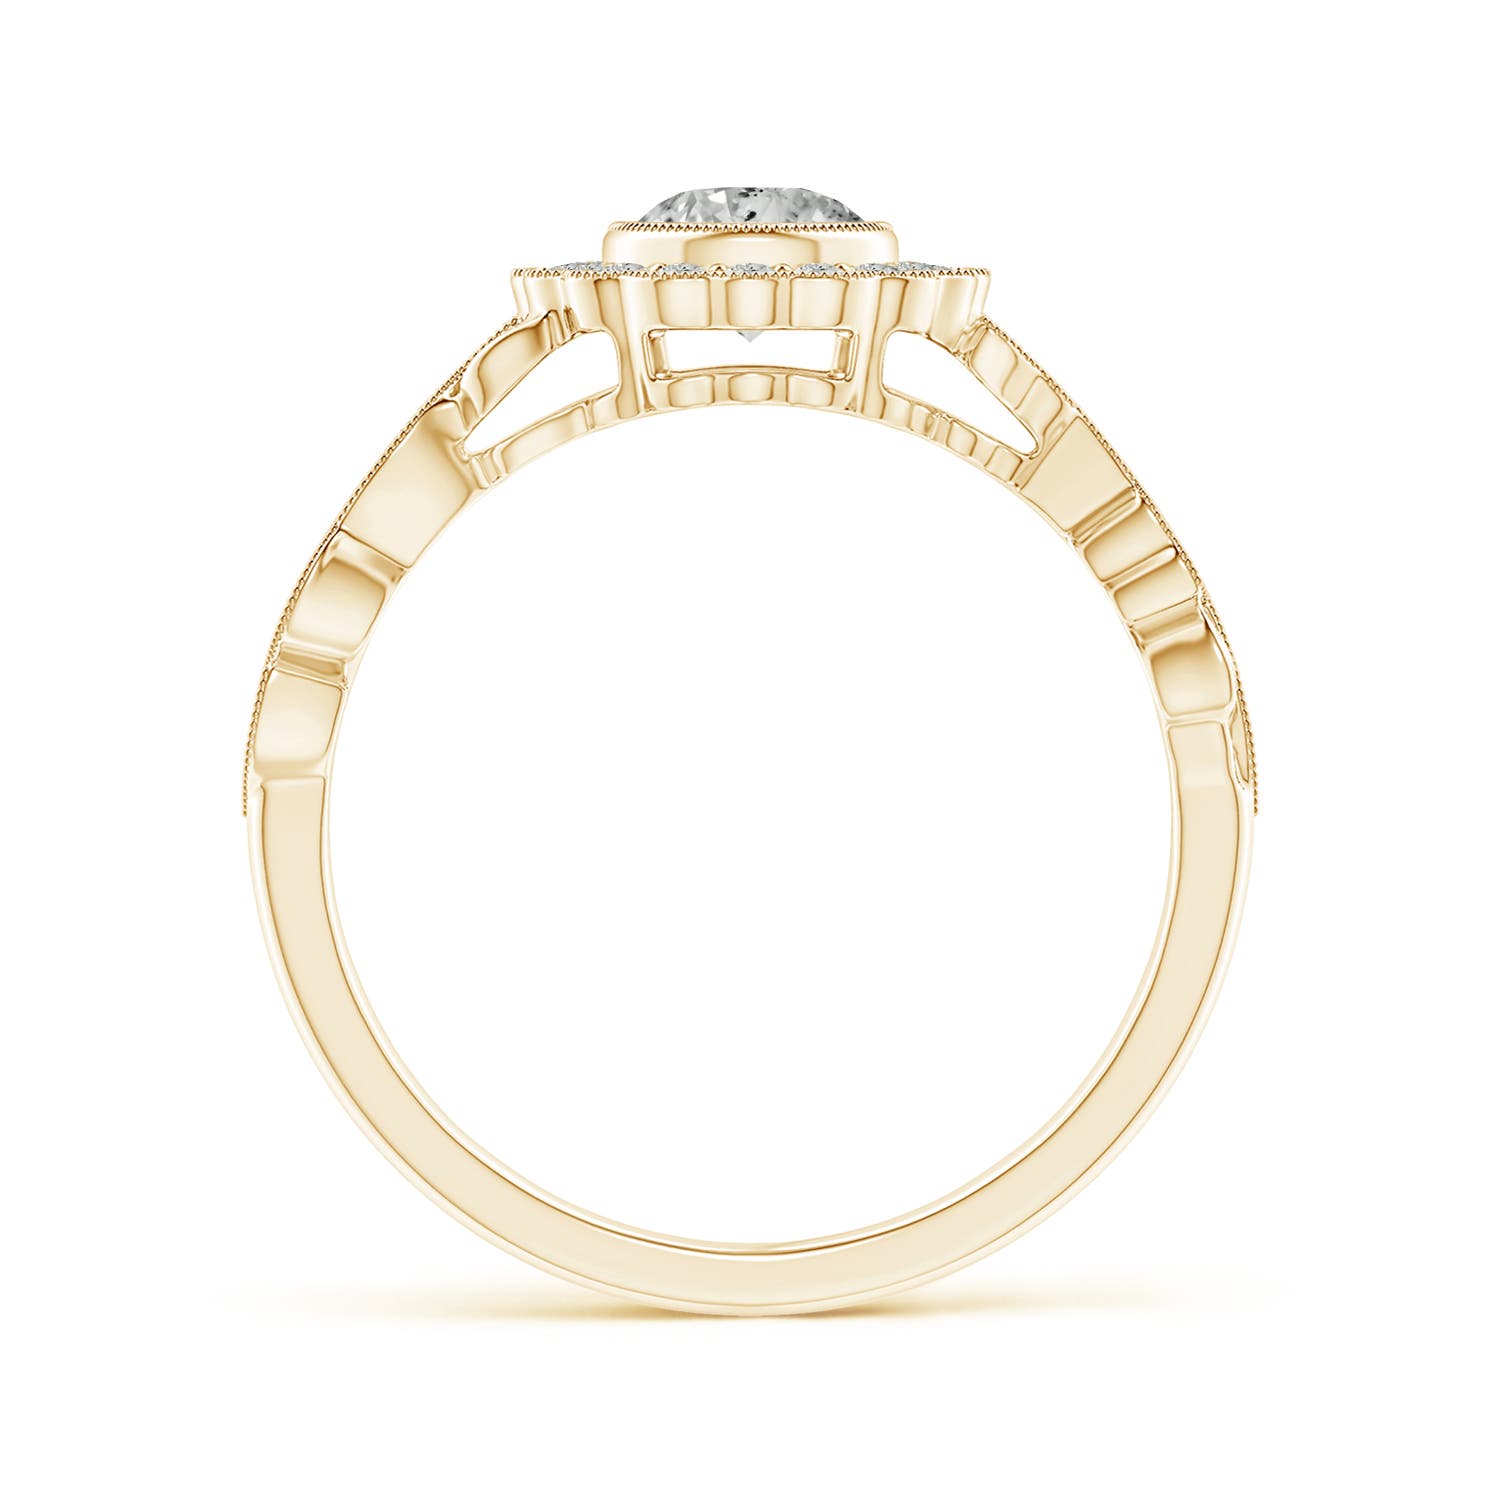 K, I3 / 0.71 CT / 14 KT Yellow Gold